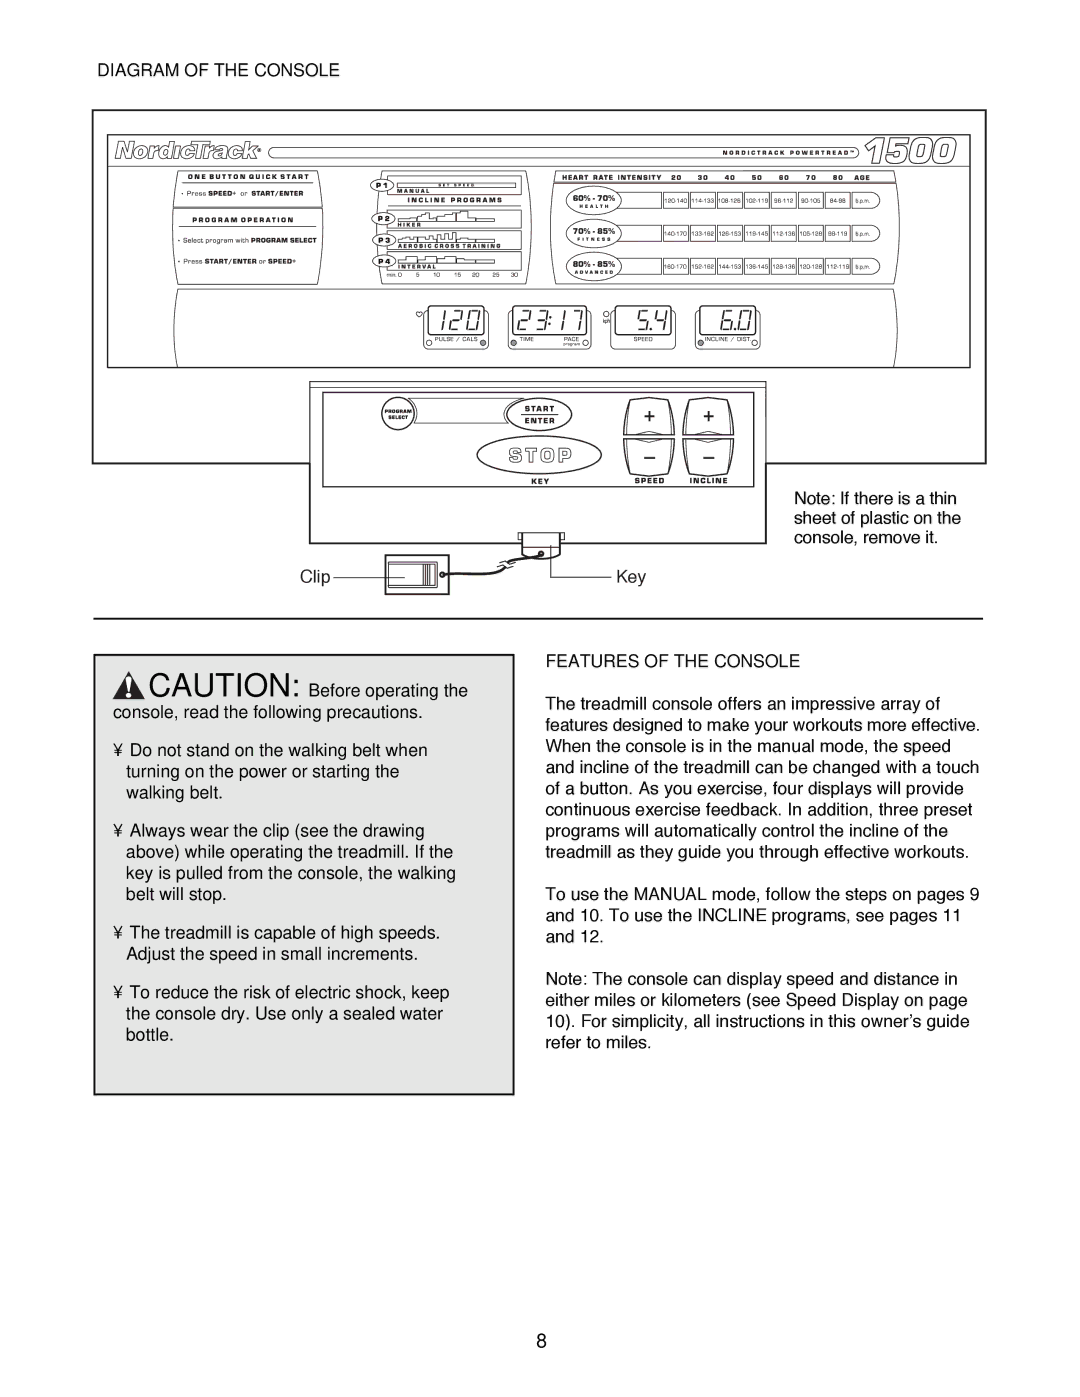 NordicTrack 1500 manual Diagram of the Console, Features of the Console 